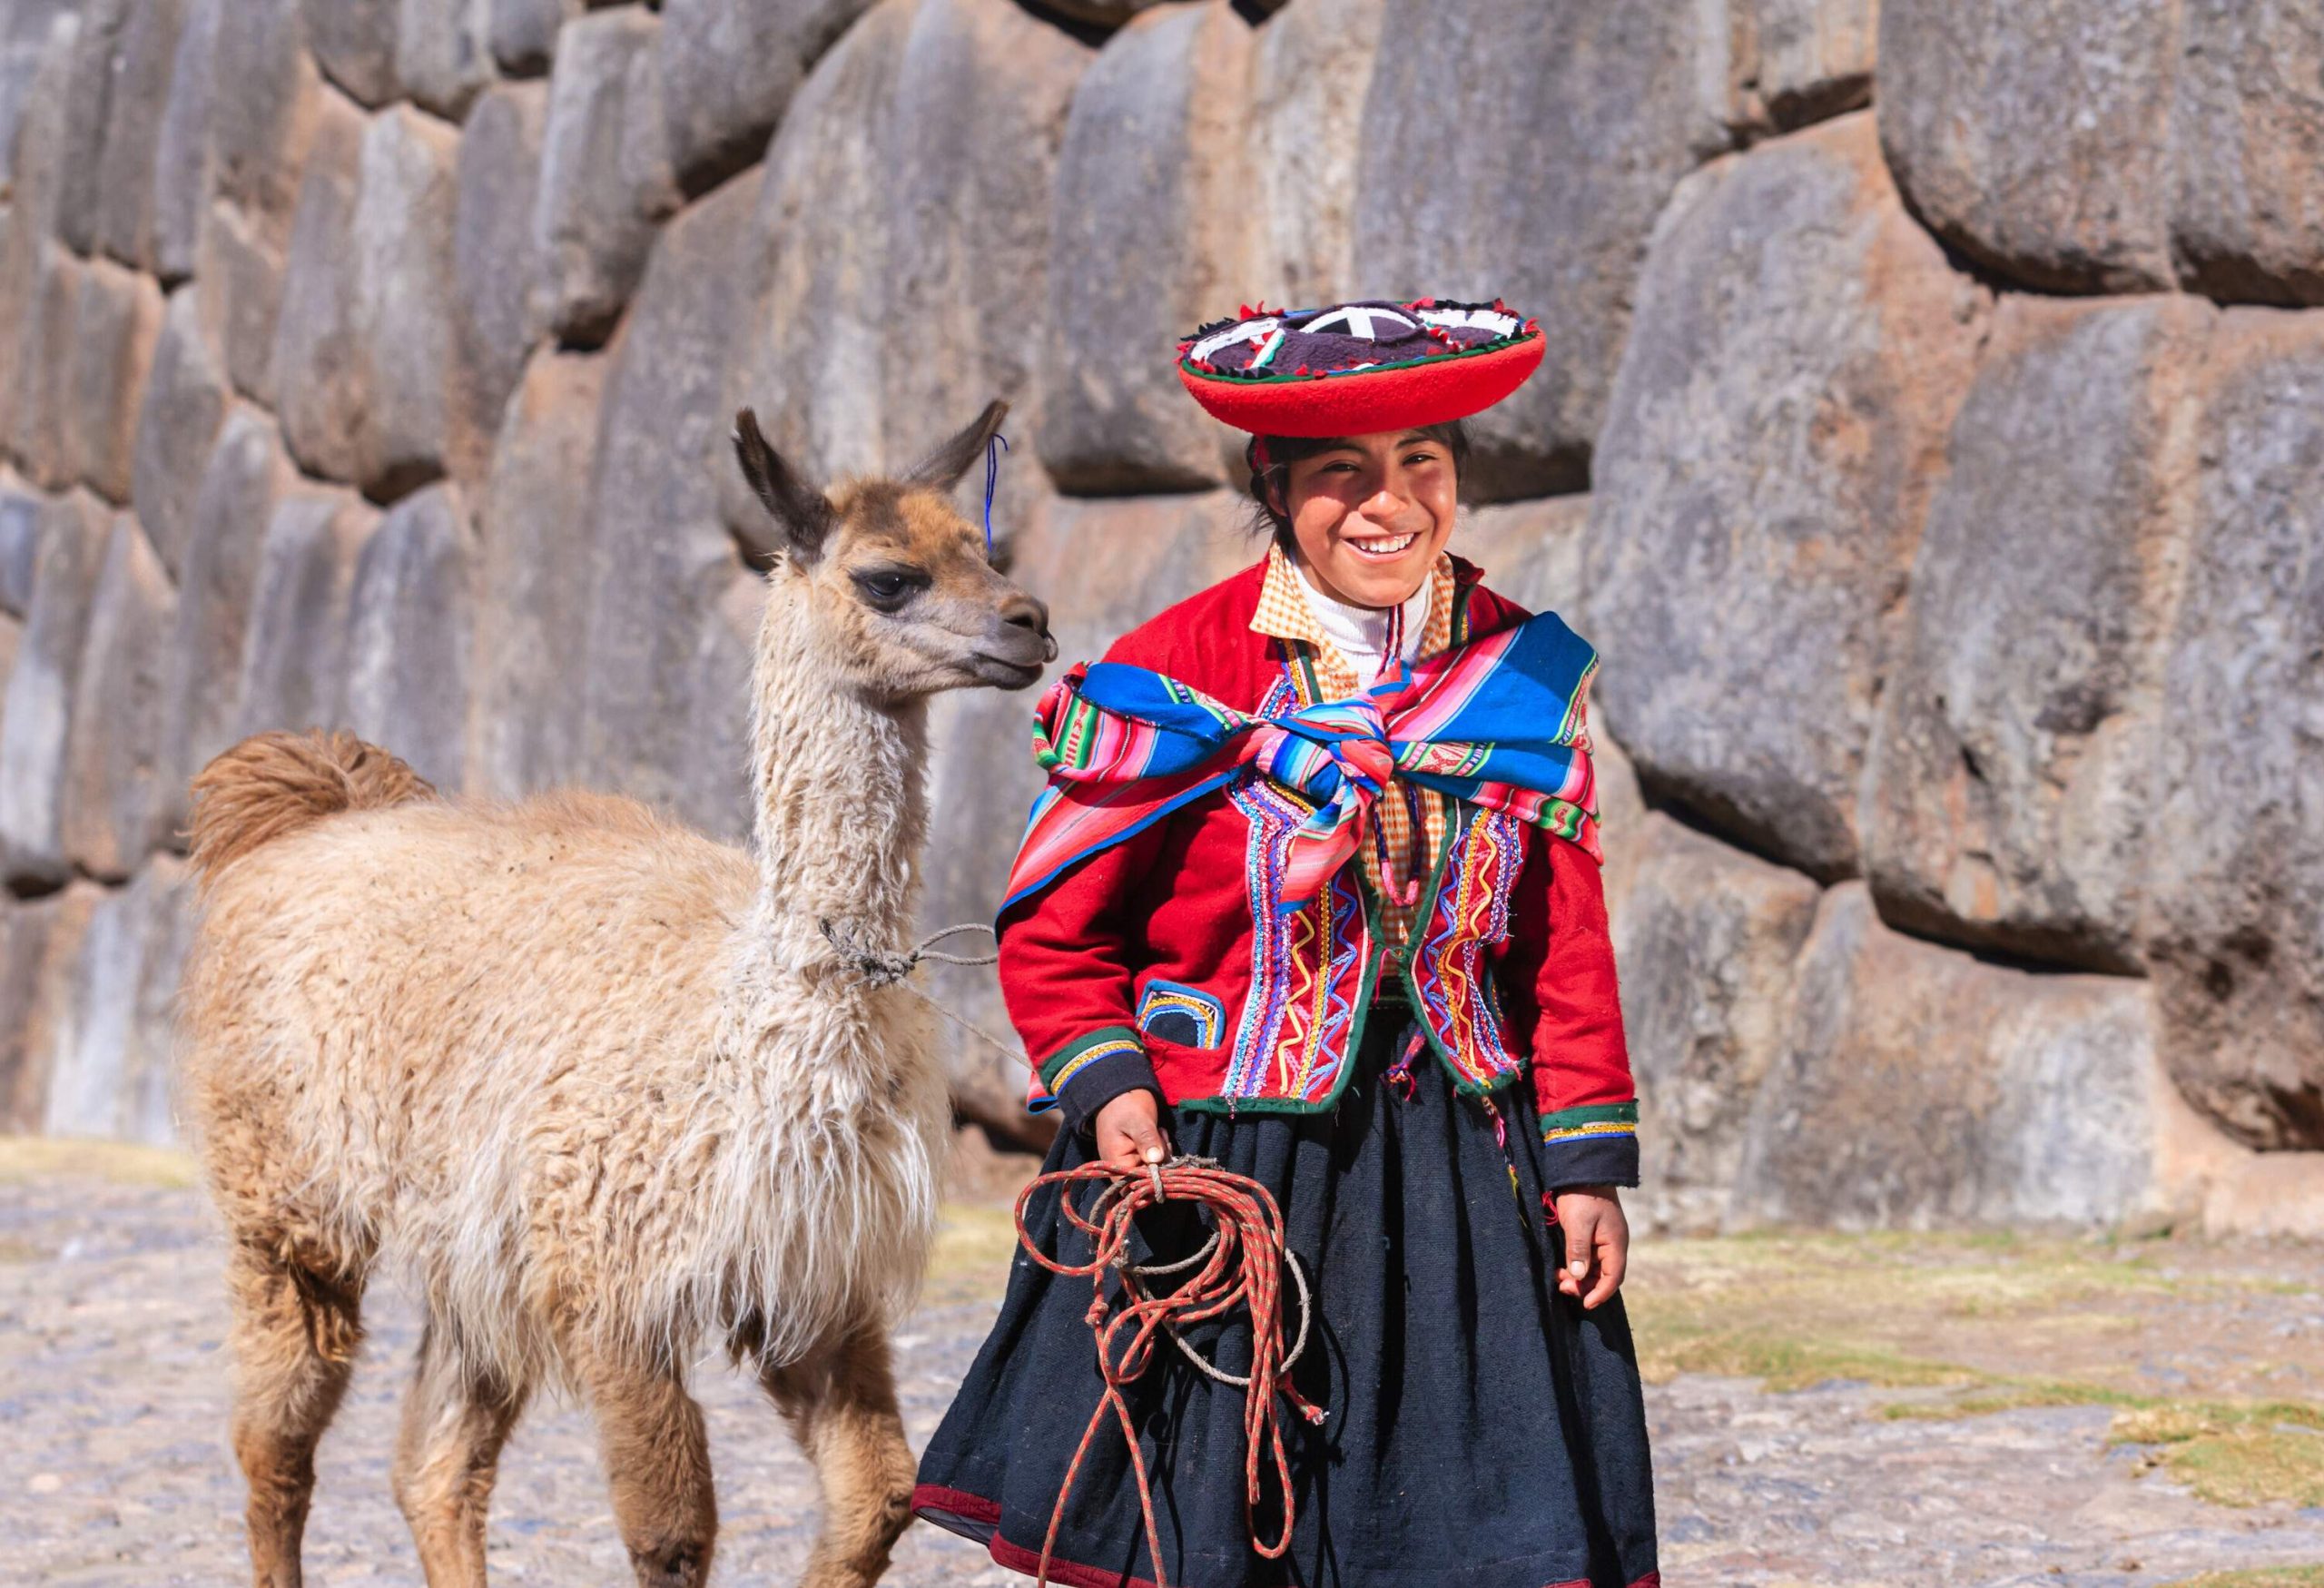 dest_peru_urubamba-valley_theme_people_girl-with-llama_gettyimages-472143437_universal_within-usage-period_62690